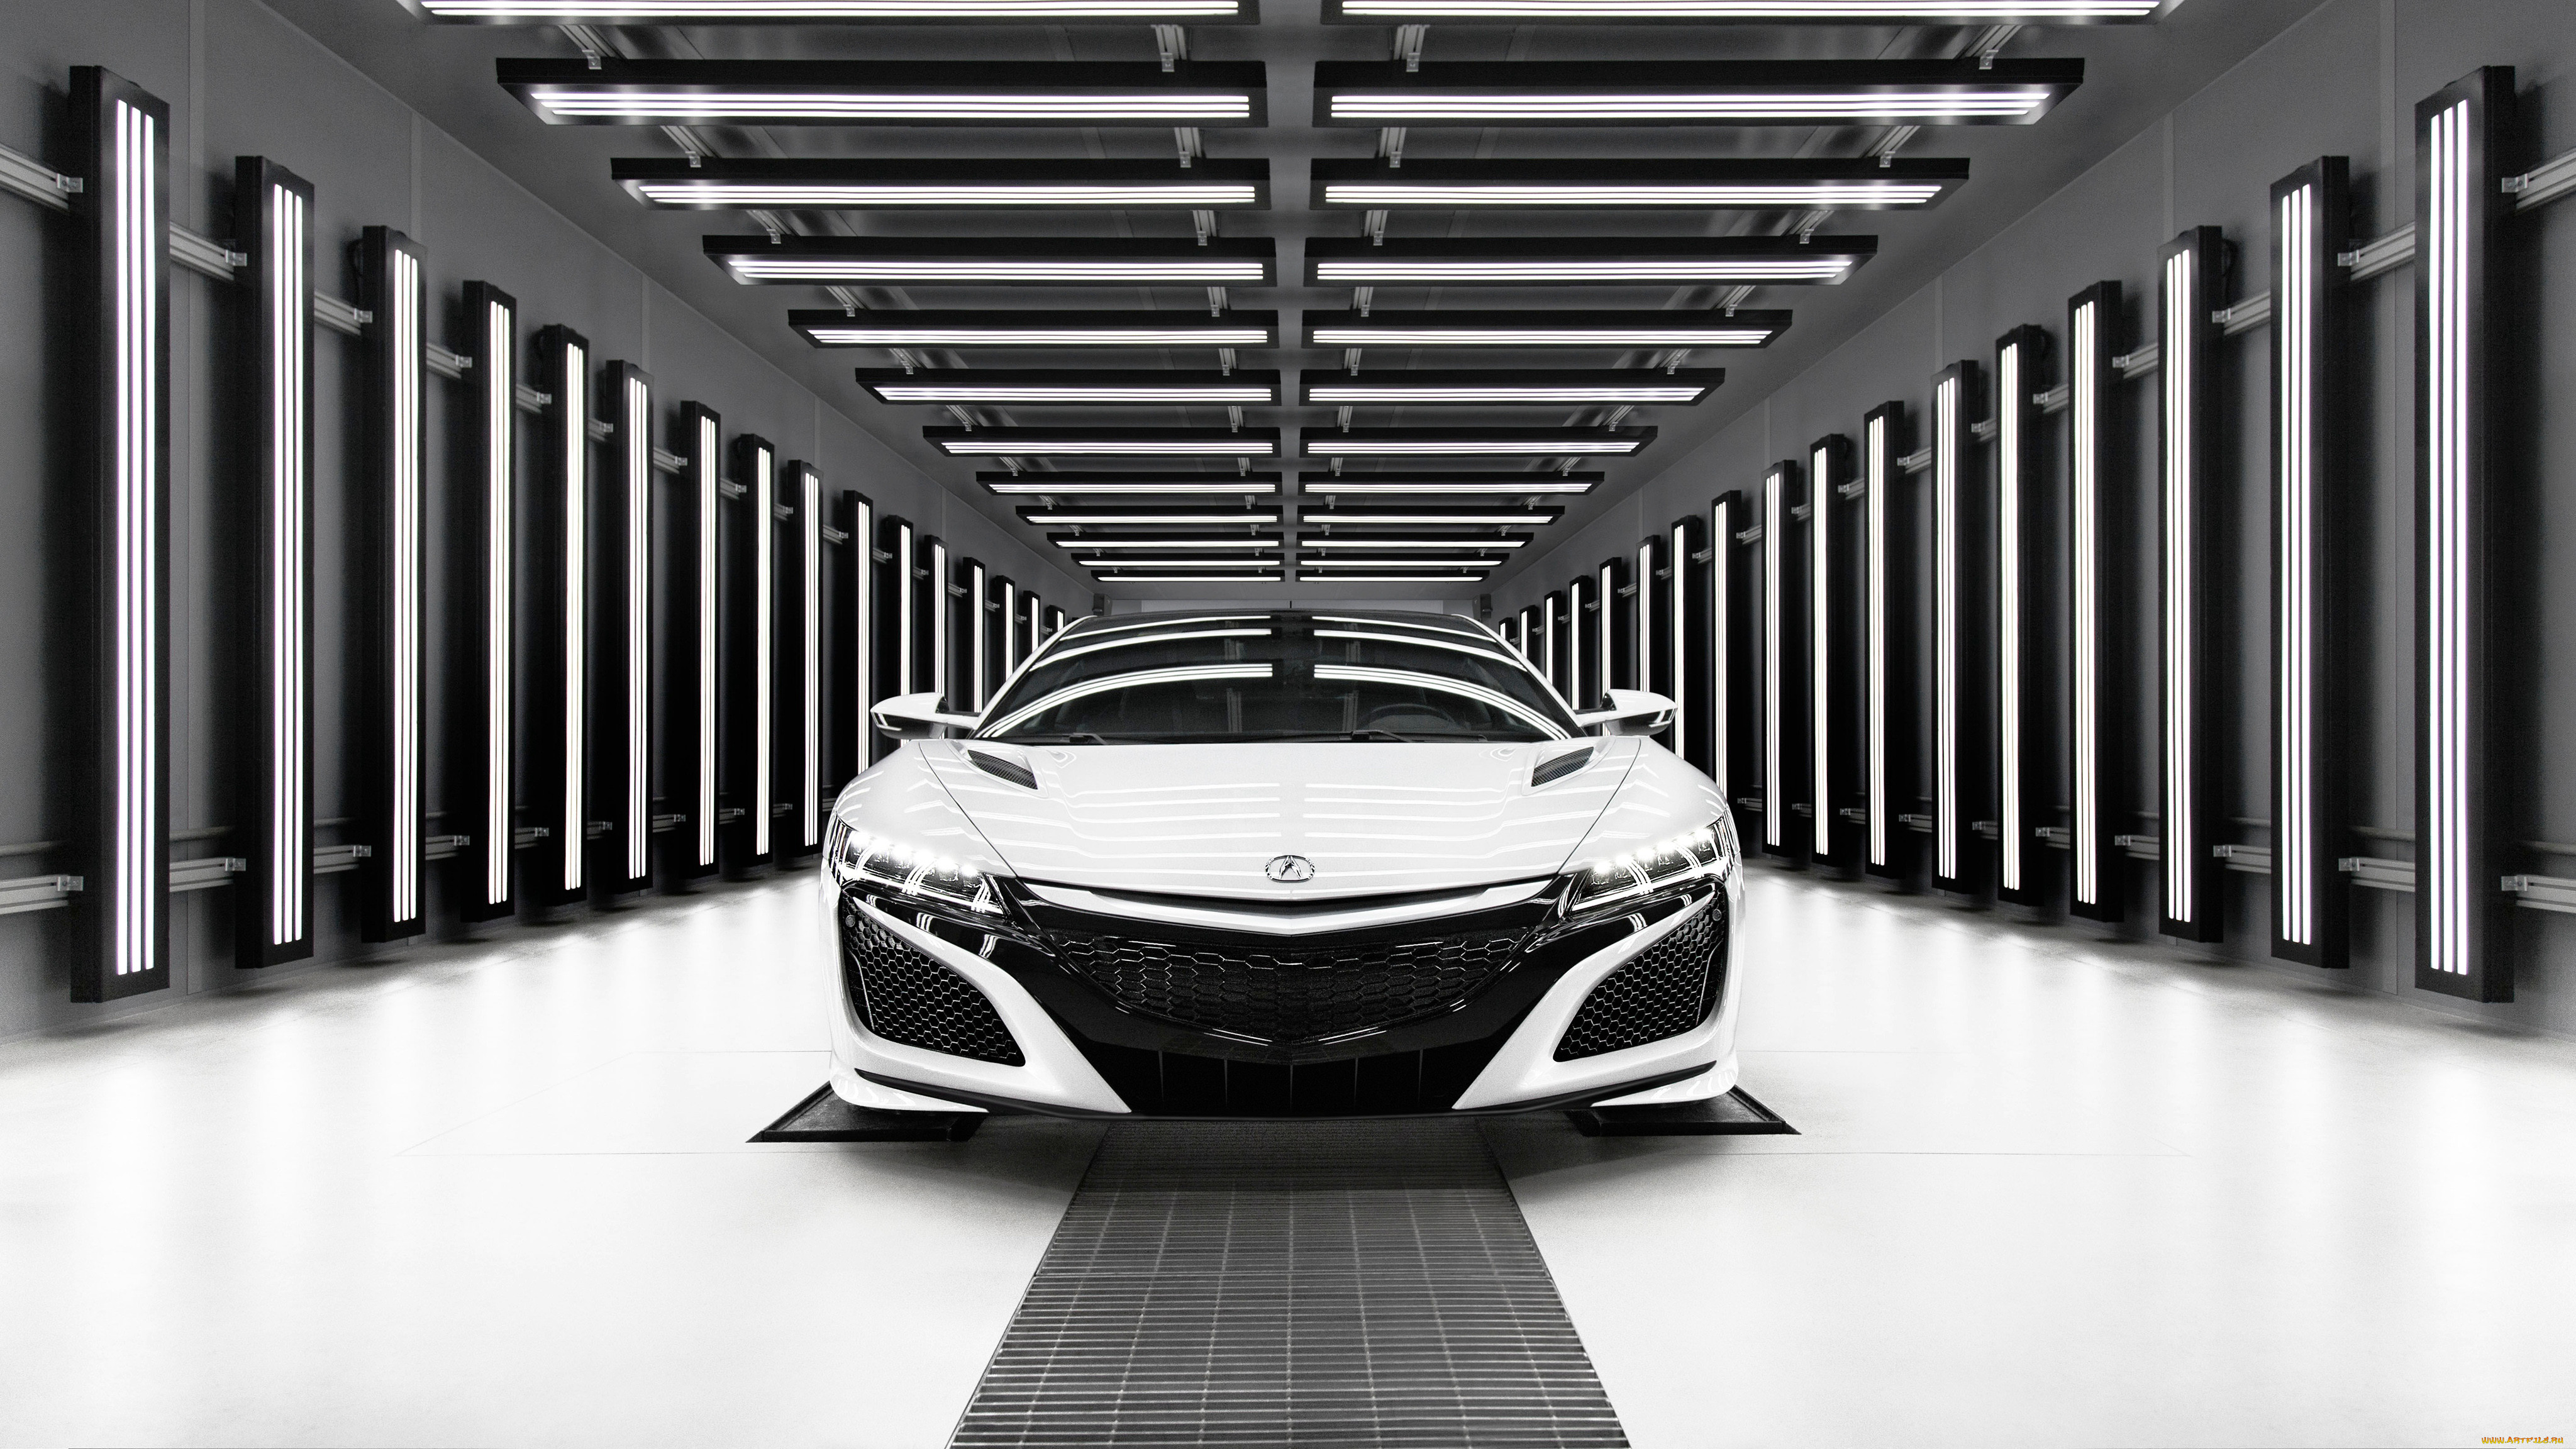 2019 acura nsx, , acura, , , 2019, nsx, front, view